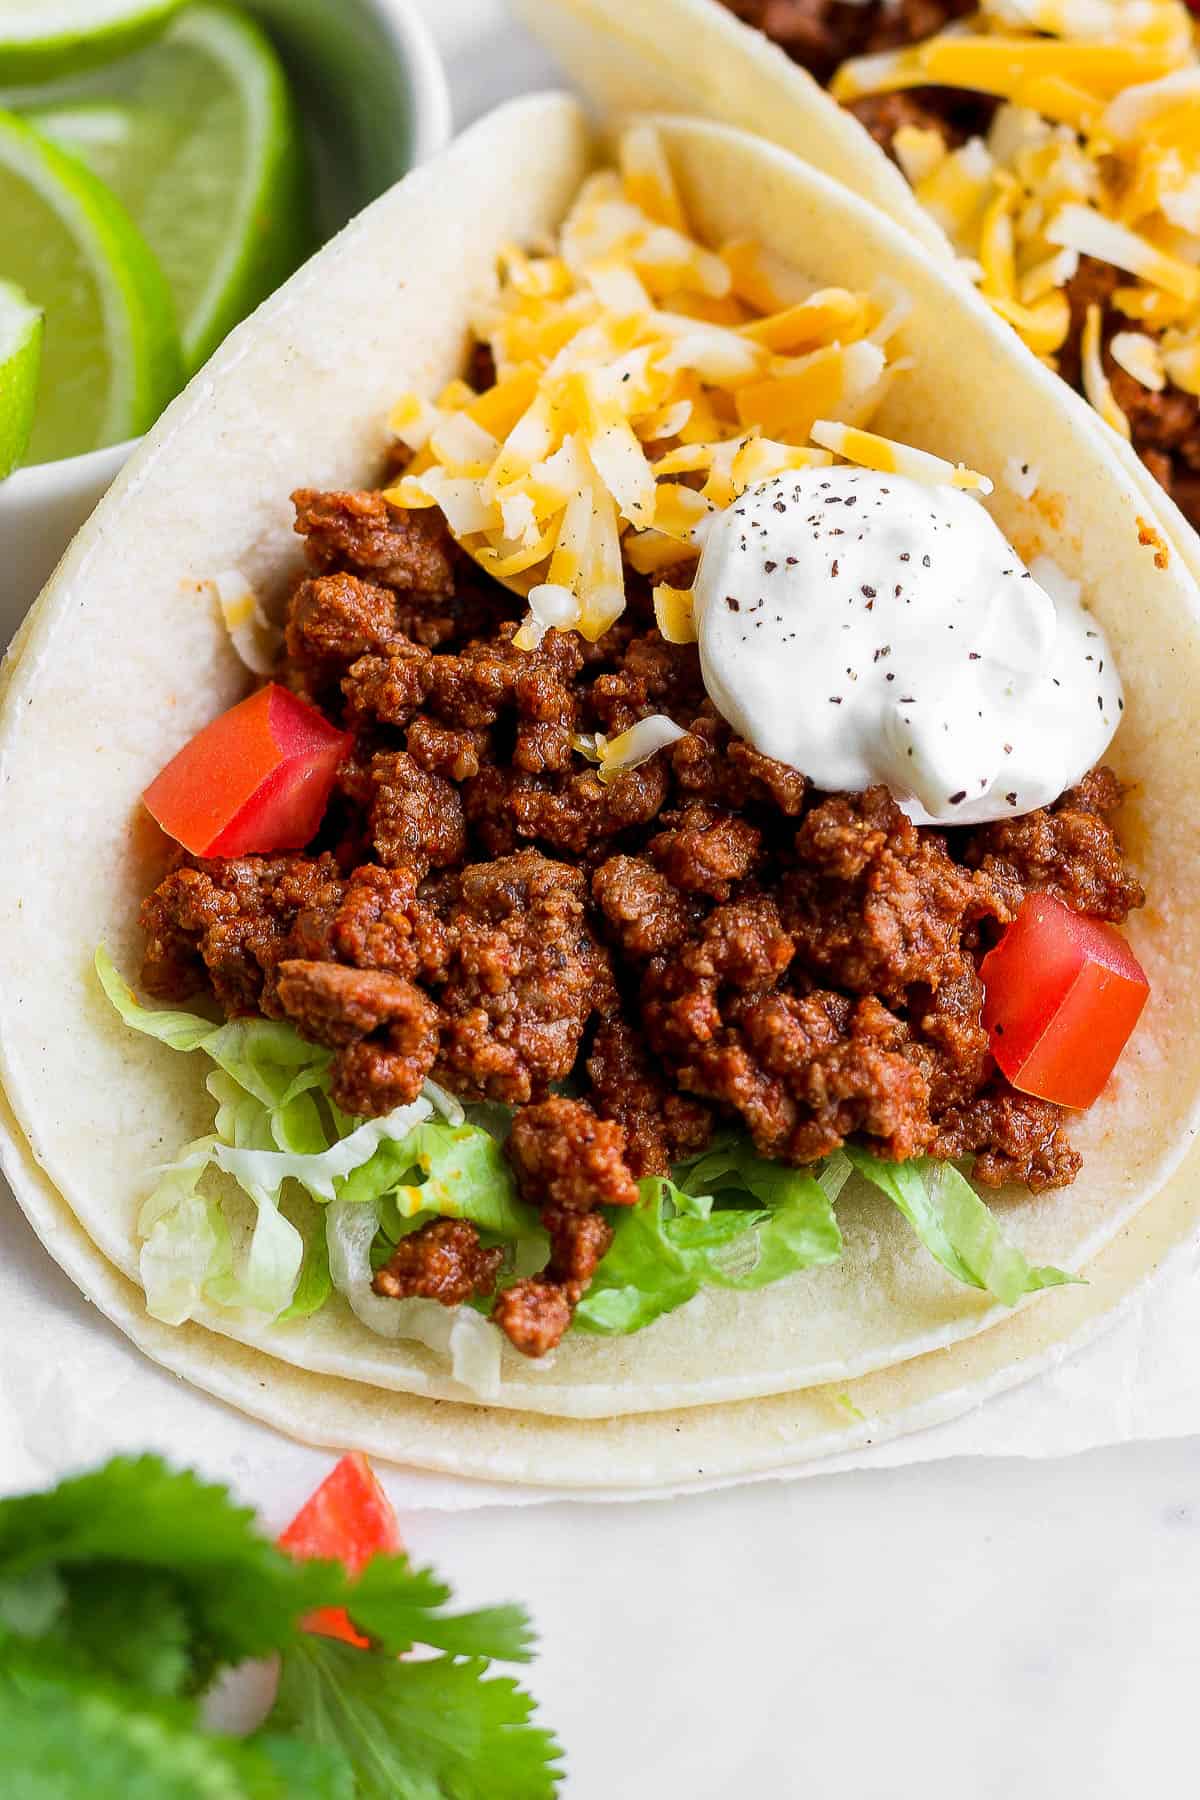 Ground beef tacos in a tortilla topped with shredded lettuce, cheese, sour cream, and diced tomatoes.